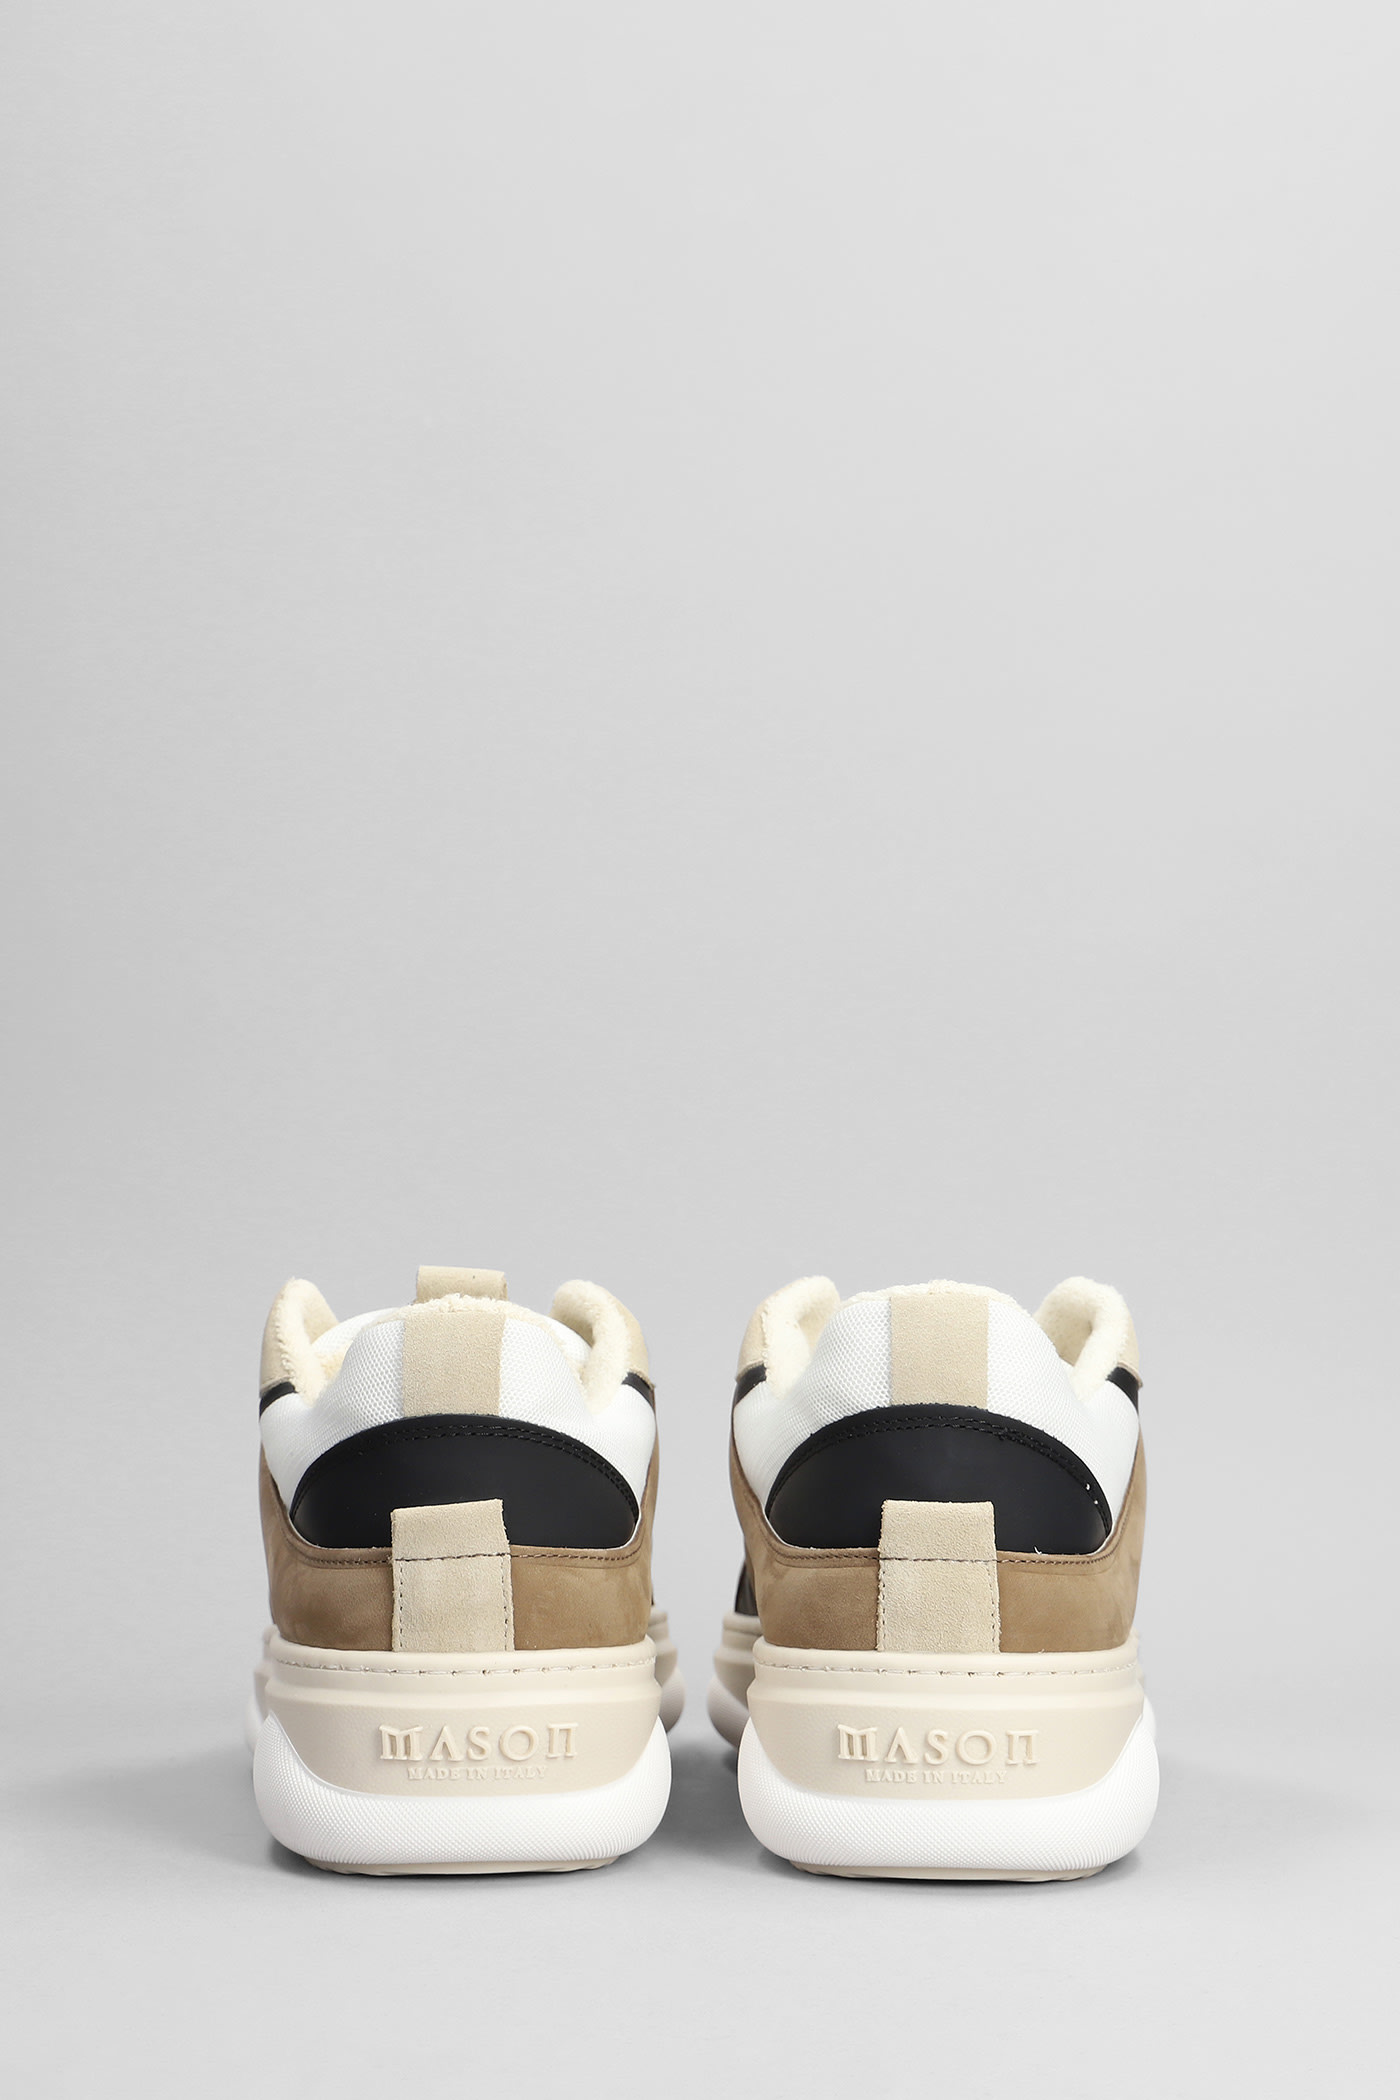 Shop Mason Garments Venice Sneakers In Brown Suede And Fabric